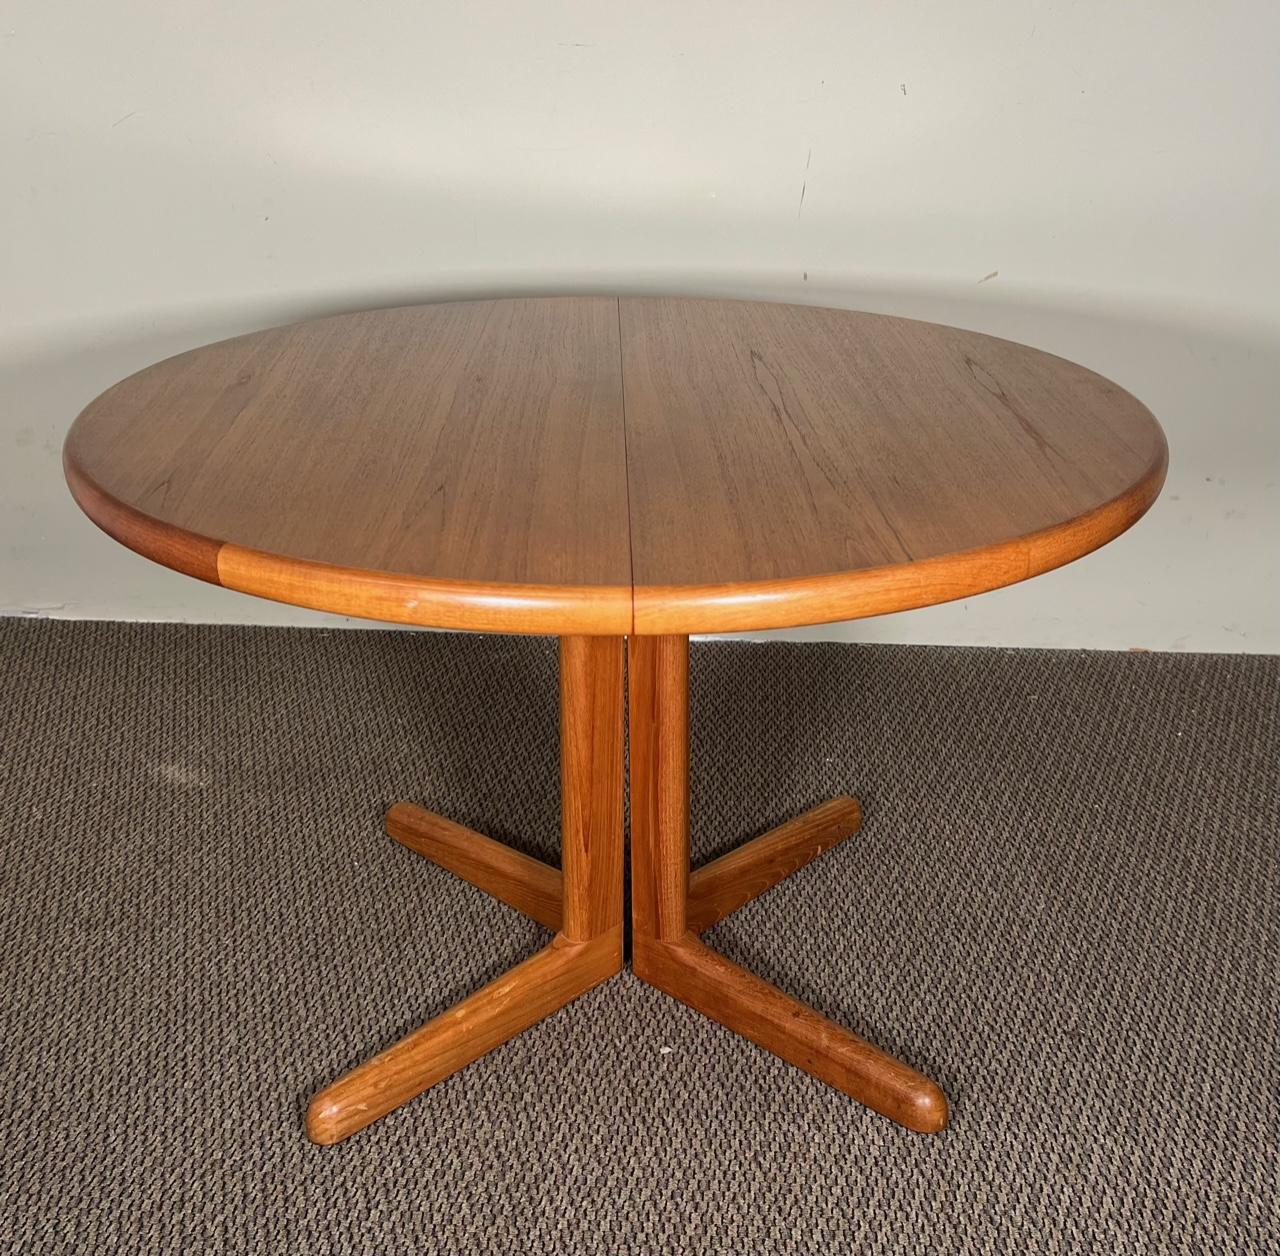 American Mid Century Danish Modern Round Teak Extending Dining Table With 2 Leaves